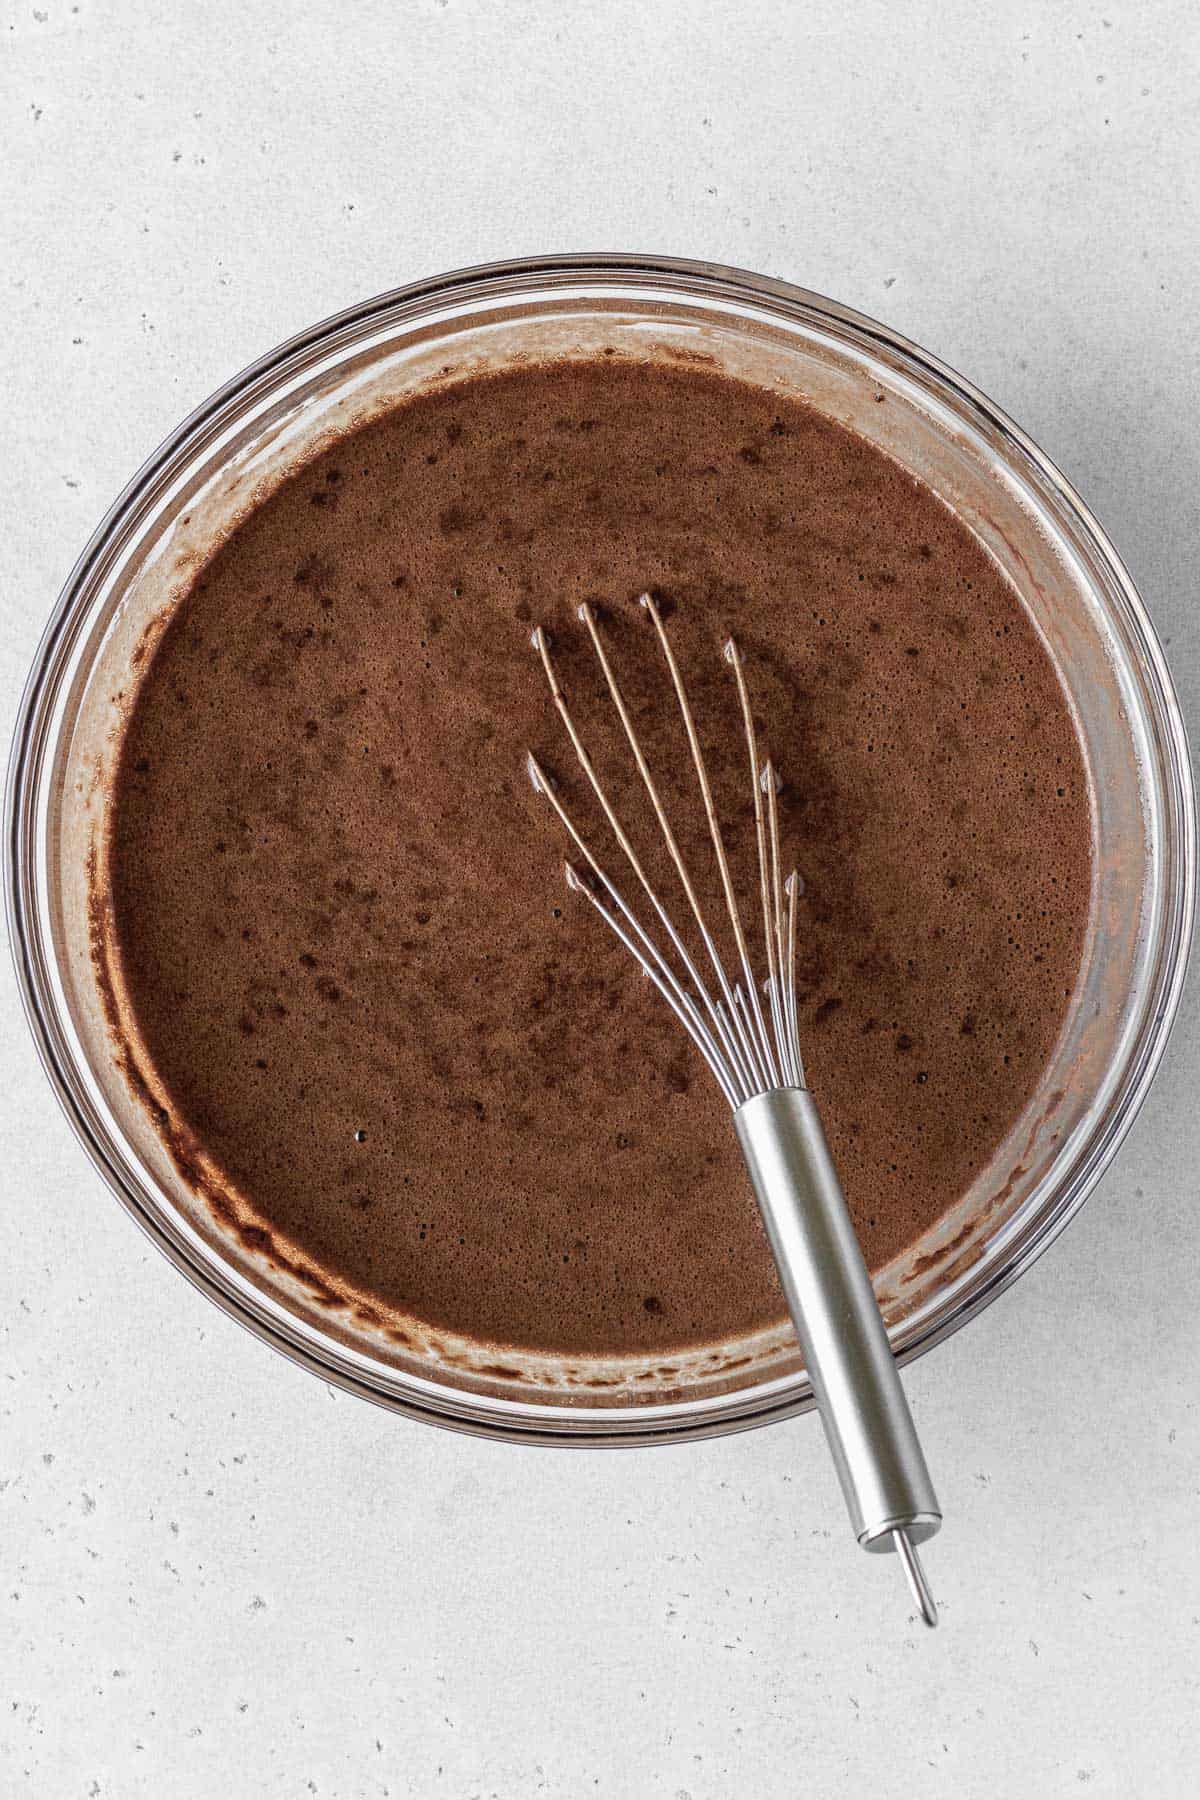 Gluten-free German chocolate cake batter in a glass bowl with a whisk inside.